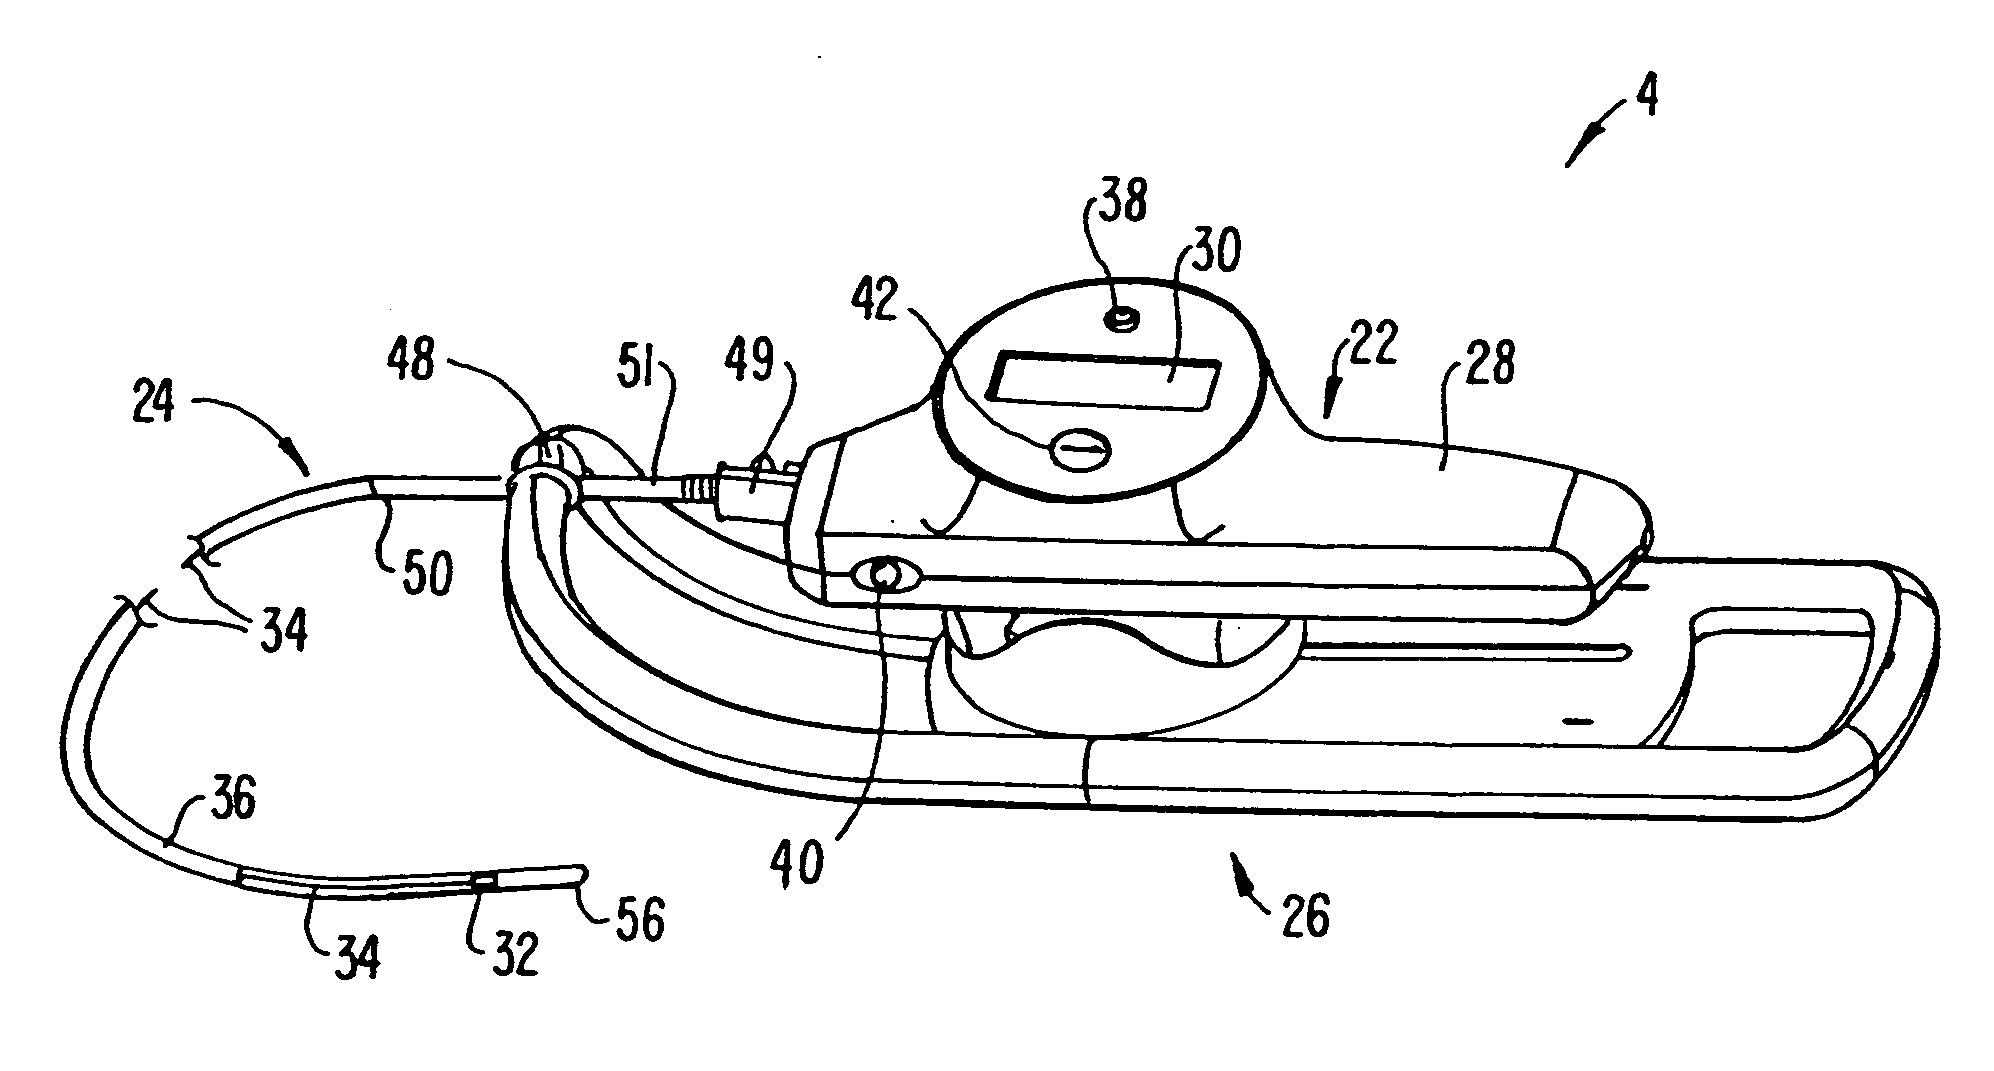 Driveable catheter systems and methods